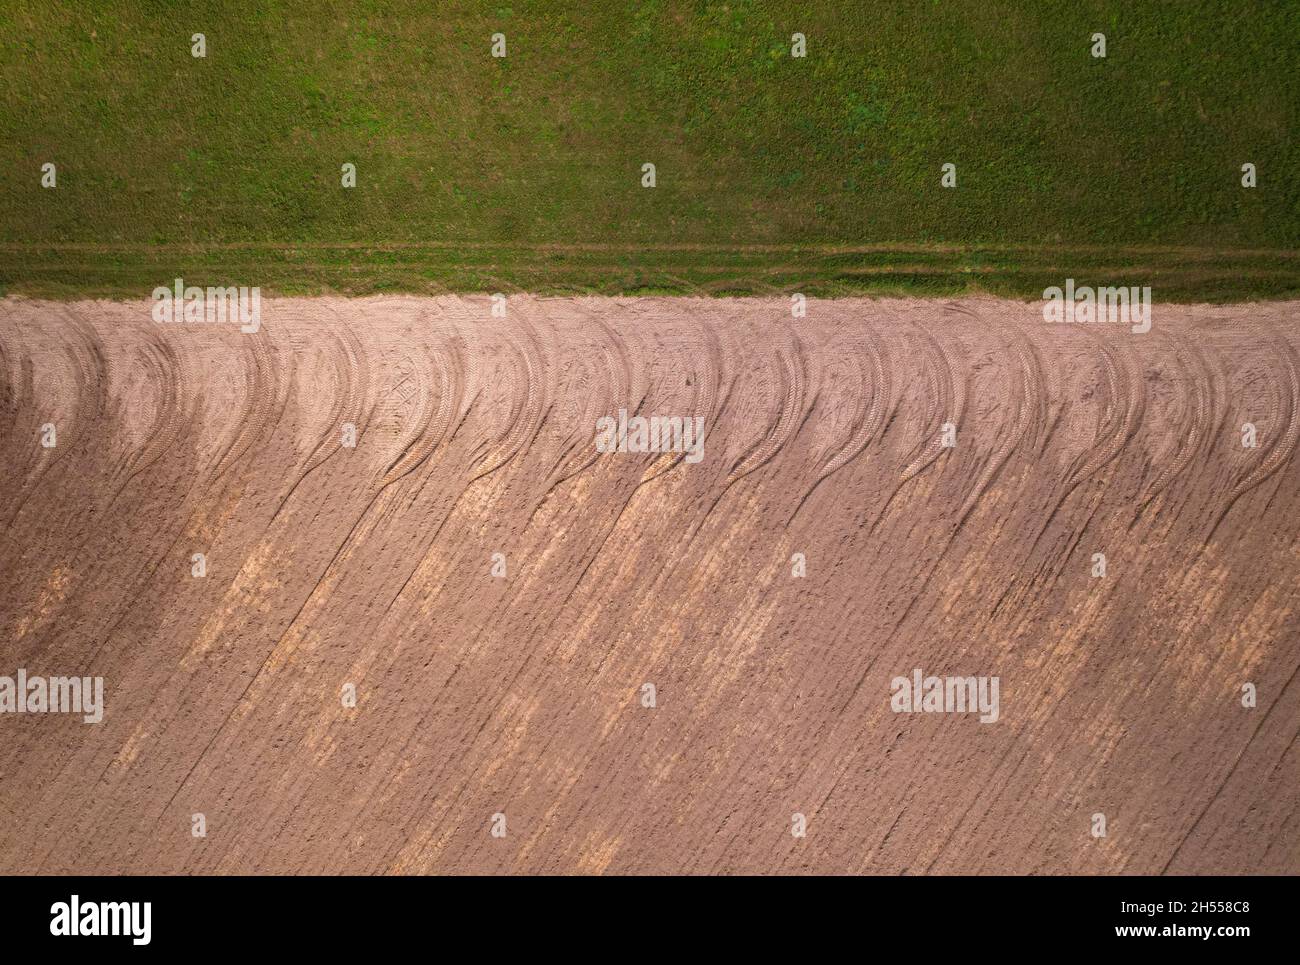 Pattern of tread marks from tractor wheels on farmland. Stock Photo